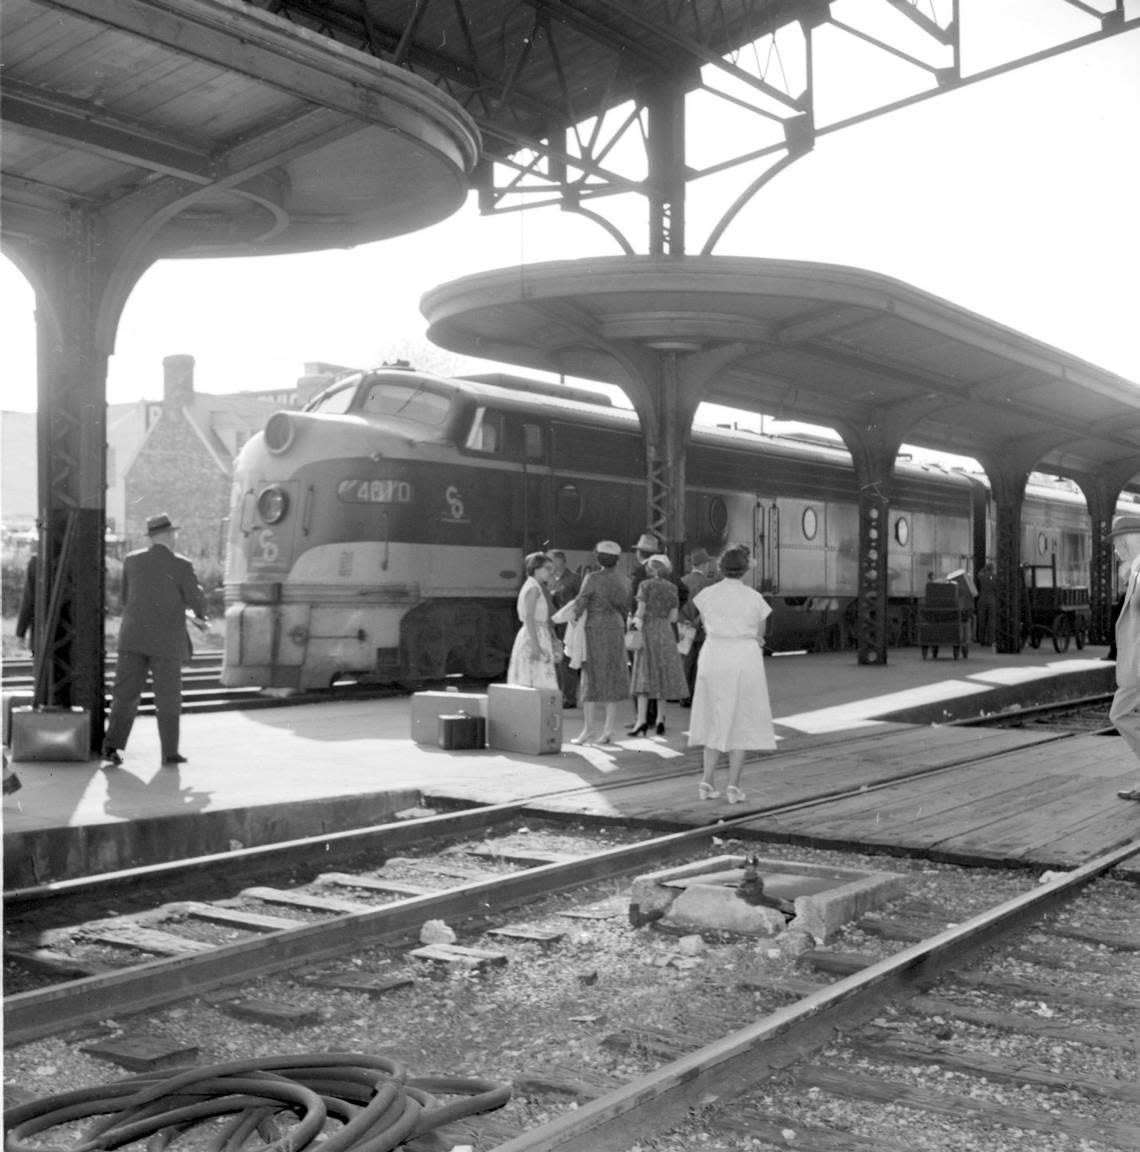 The Chesapeake and Ohio Railroad’s George Washington waited by the platform behind Union Station on Thursday May 9, 1957. This was the last time the passenger train would stop at Union Station, which was to be closed because of high operating costs and low passenger levels. The station was demolished in March 1960. Herald-Leader archives